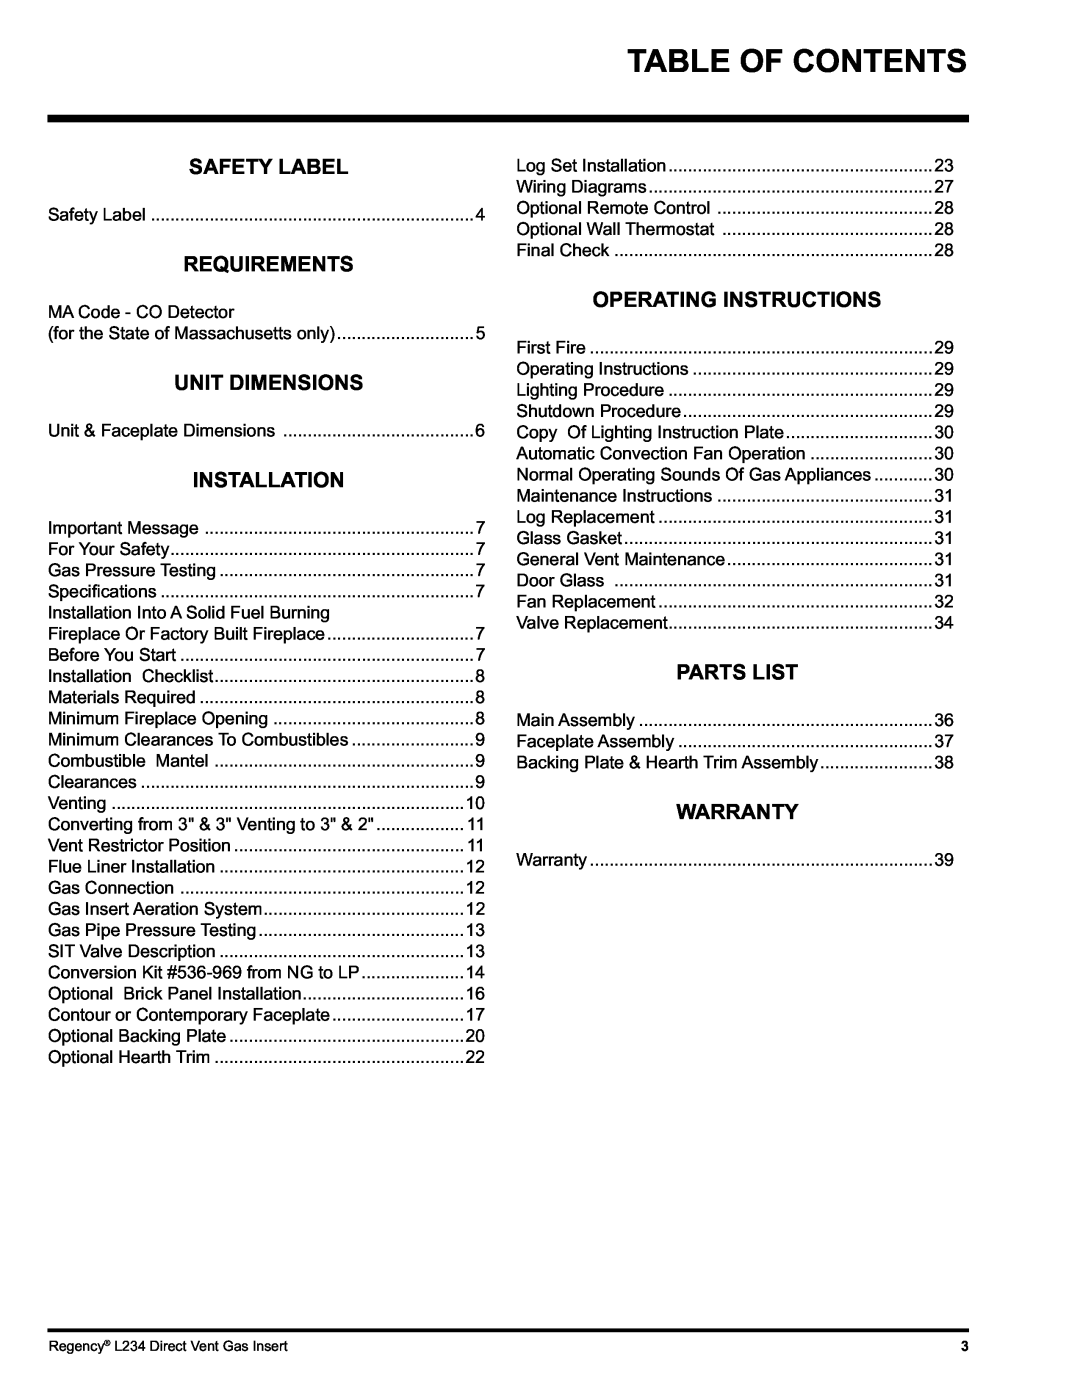 Regency L234-NG, L234-LP Table Of Contents, Unit Dimensions, Operating Instructions, Parts List, Warranty, Safety Label 